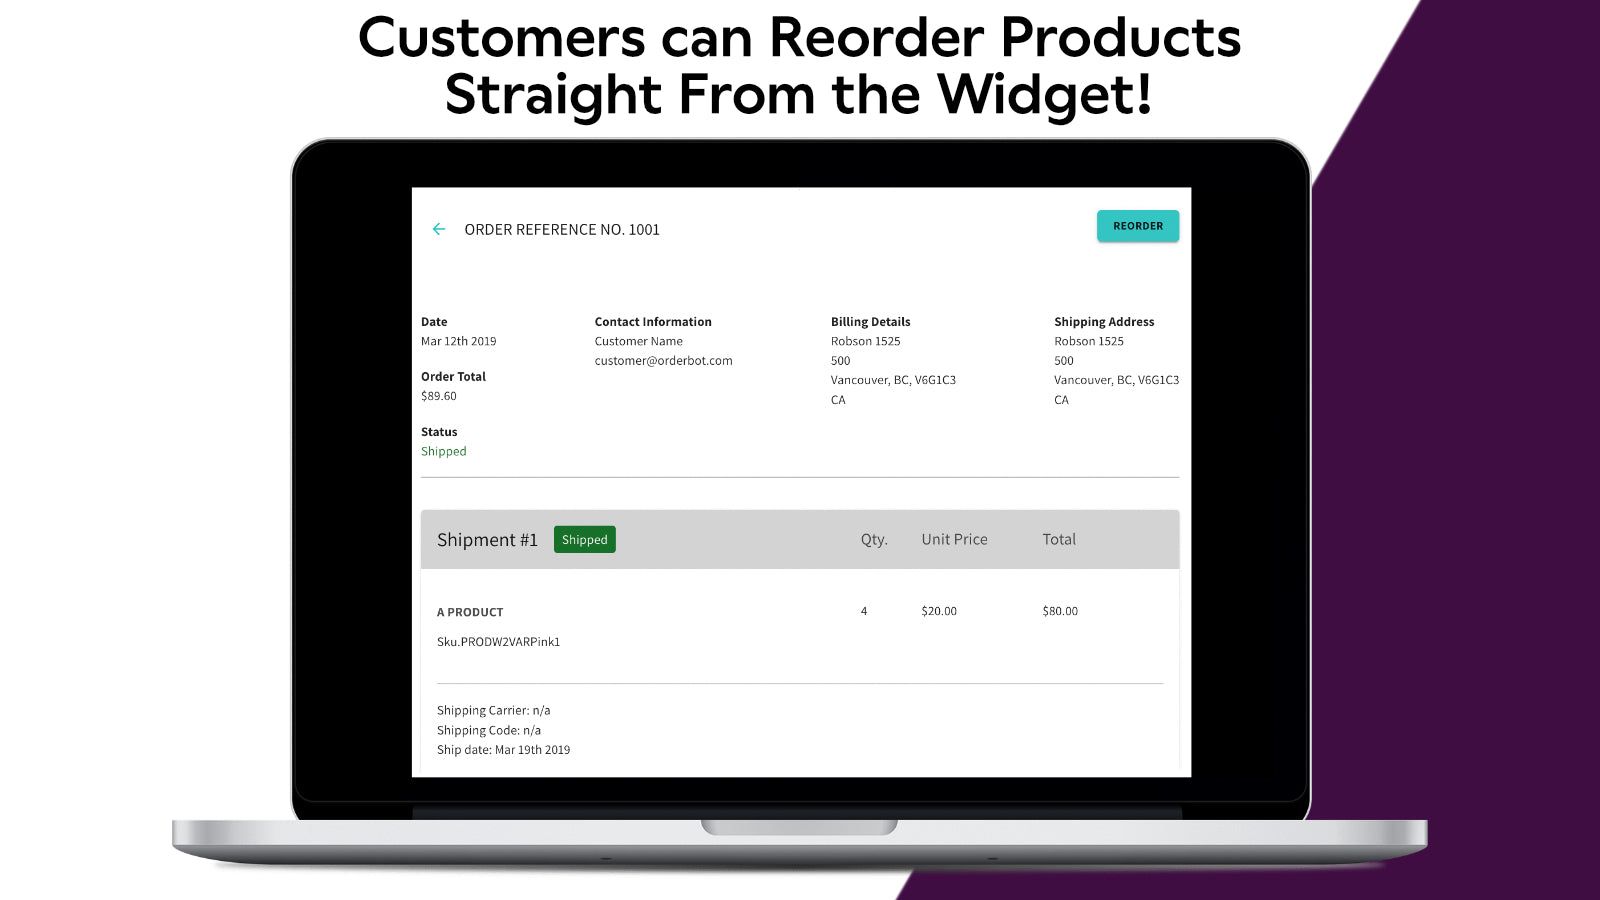 Customers can reorder products straight from the widget